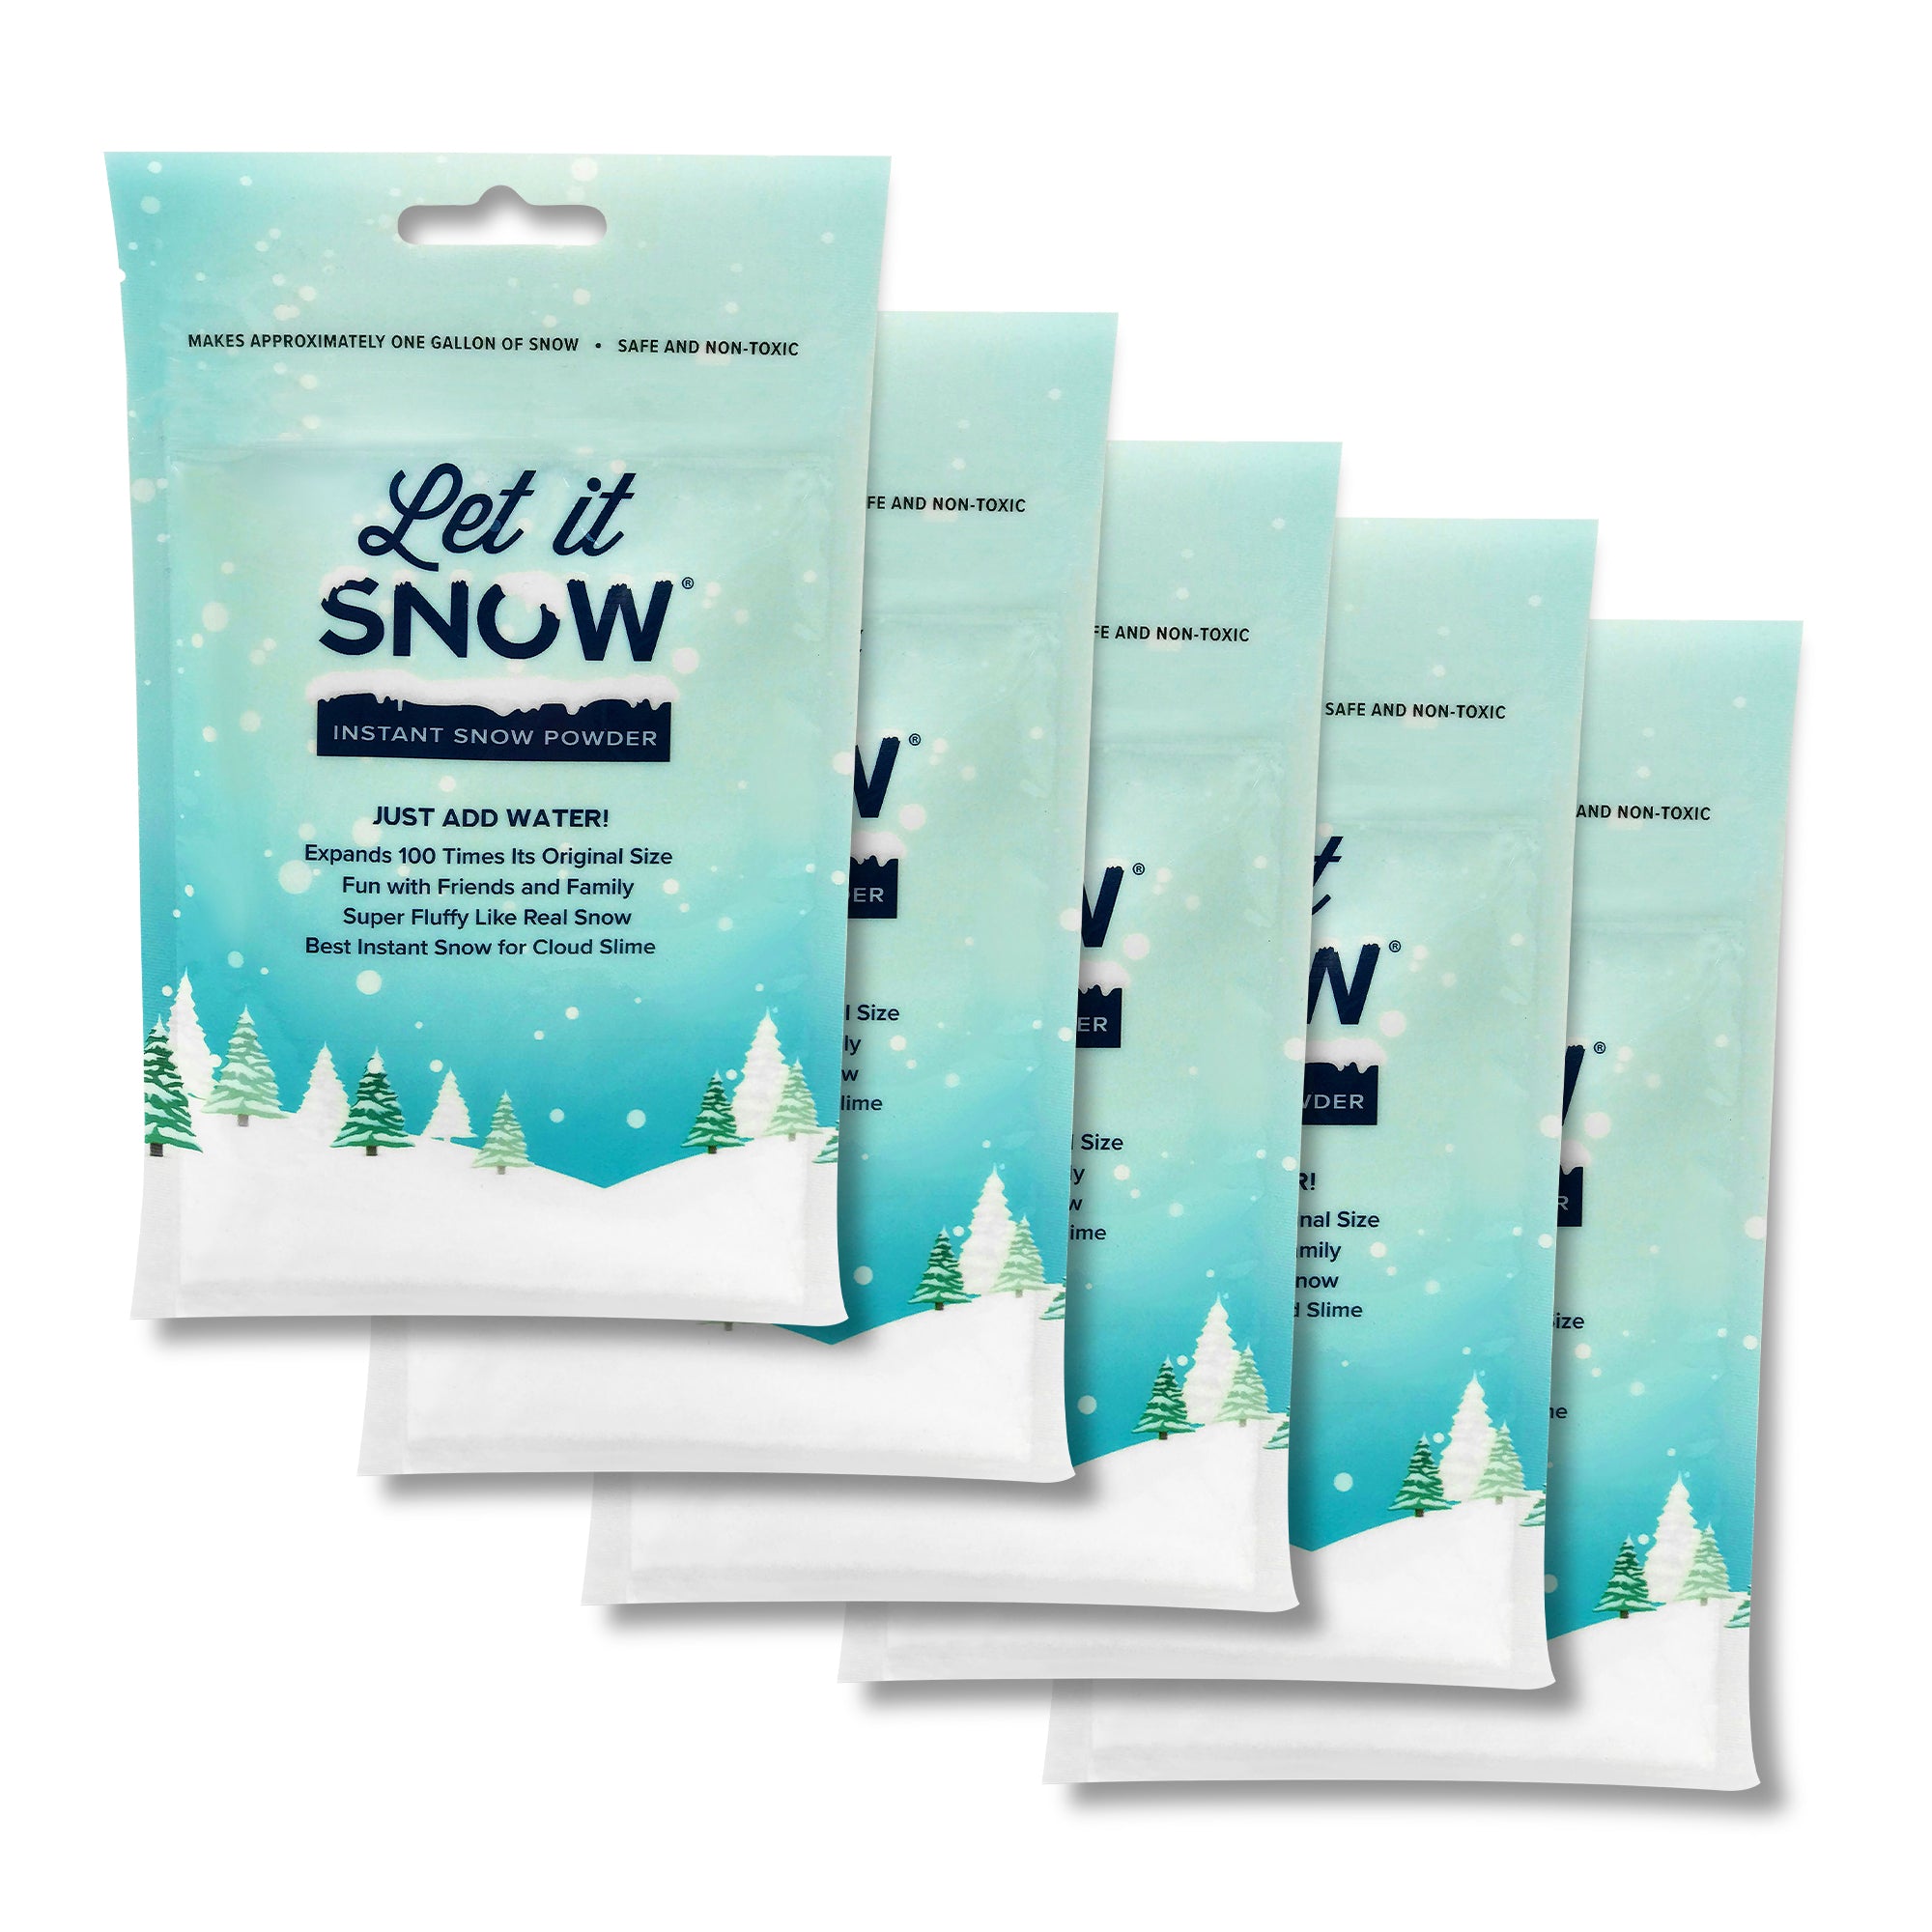 3 Packs Instant Snow Powder - White Instant Snow Powder Fake Artificial  Snow - Great for Holiday Snow Decorations Playing Snow Day - Just Add Water